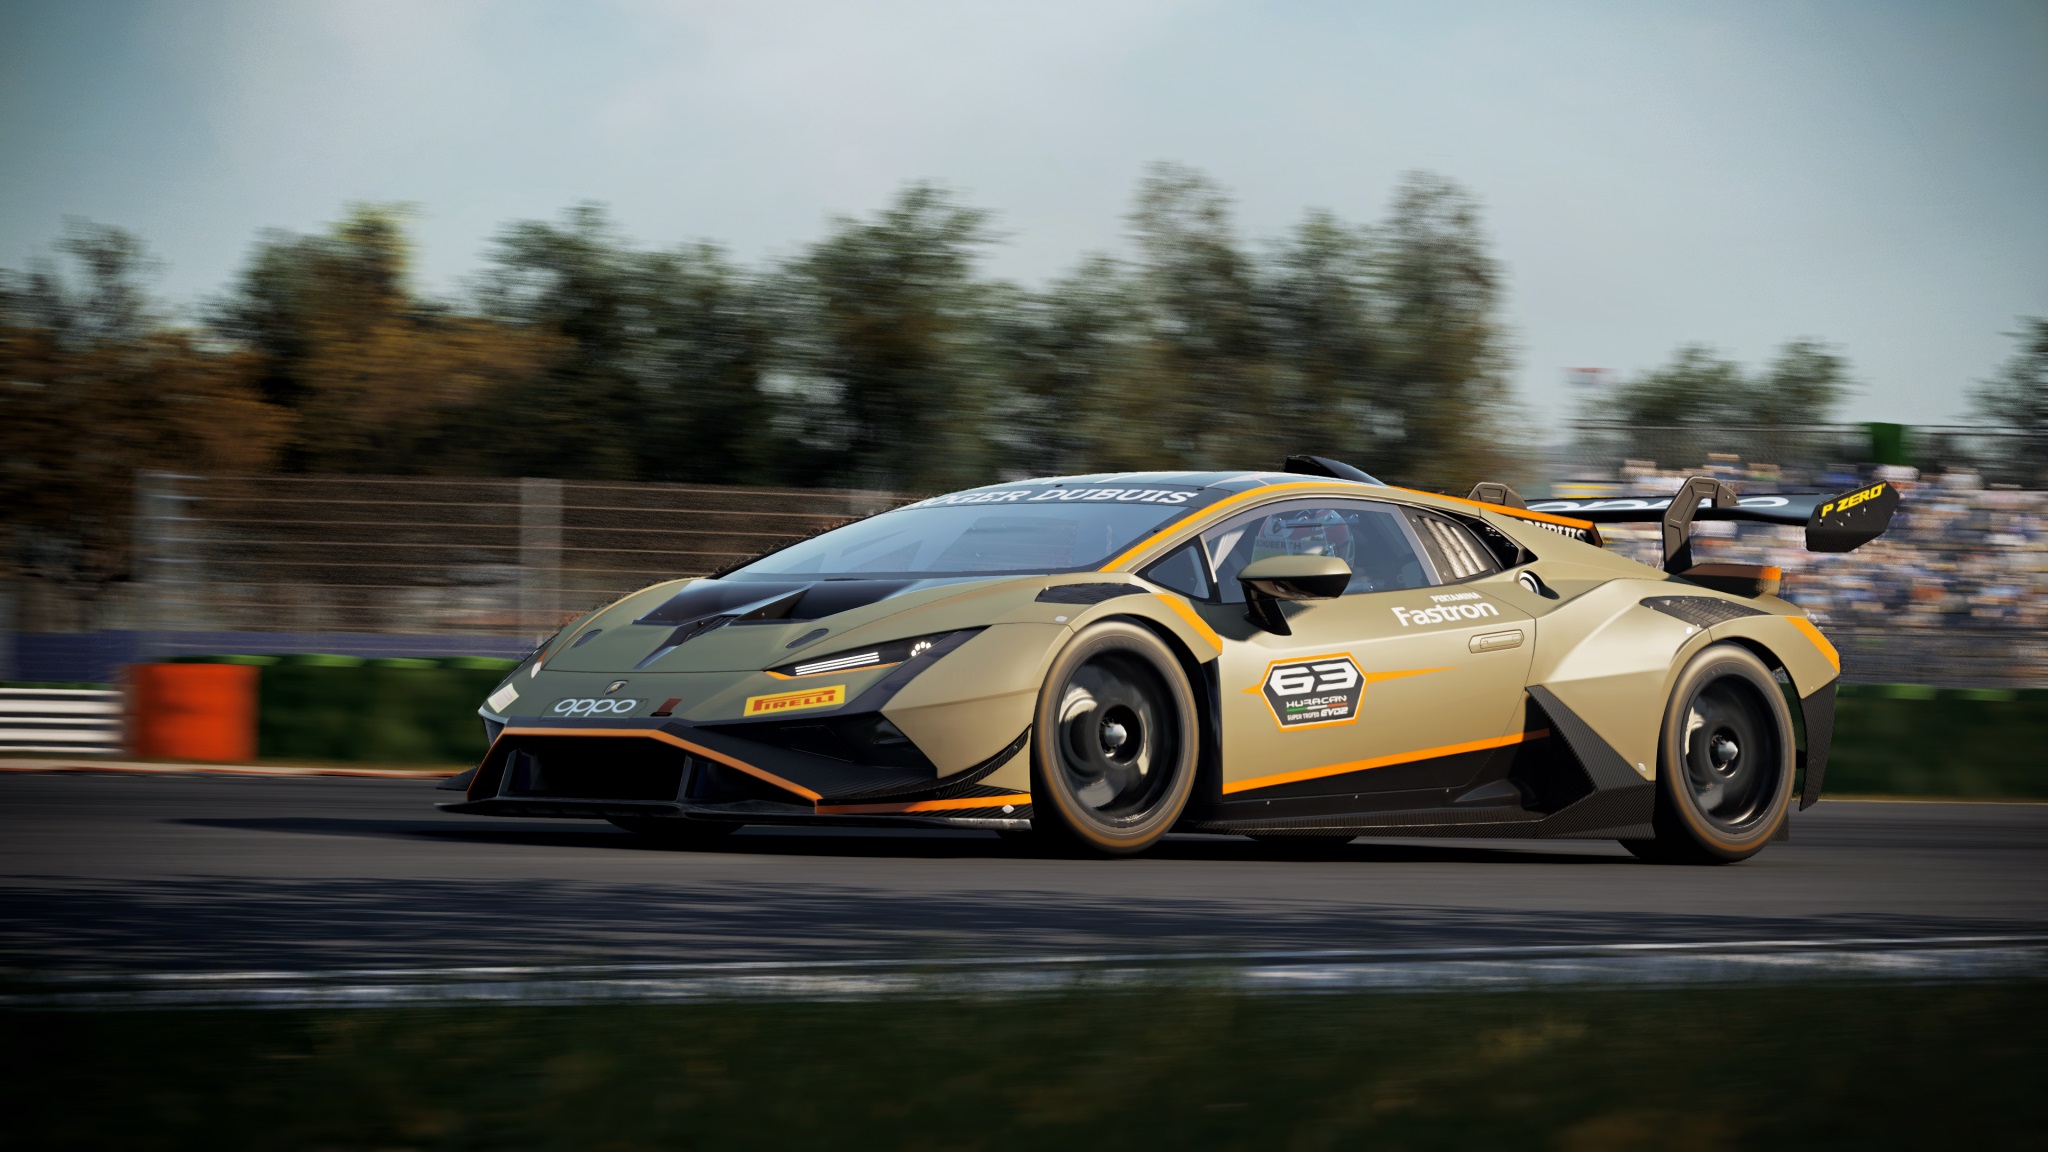 Assetto Corsa Competizione adds five new cars with Challengers